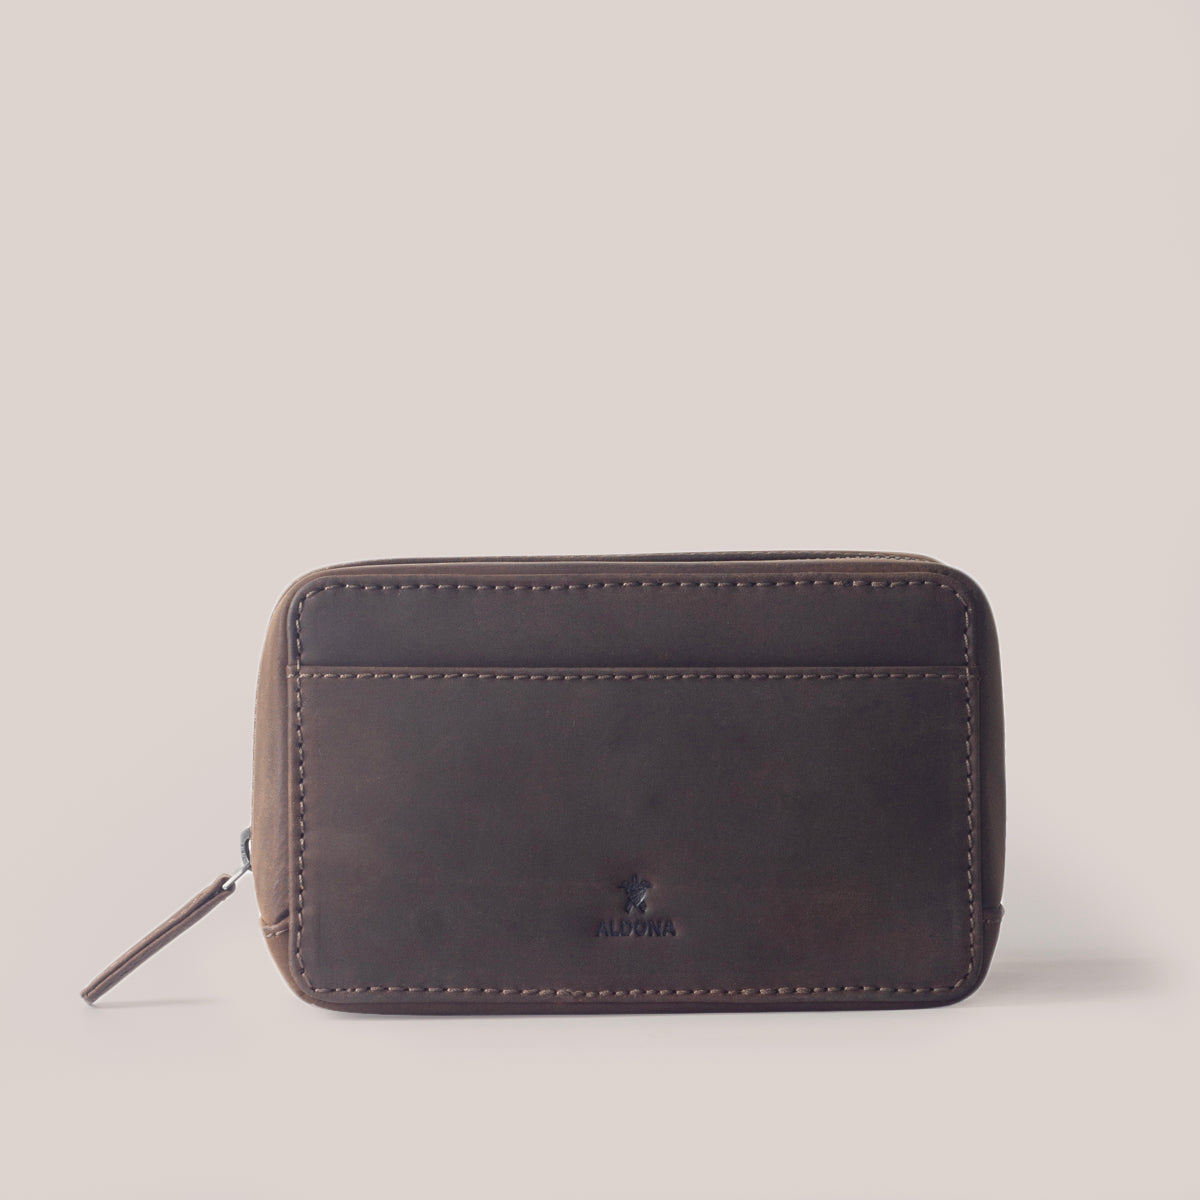 Small leather accessories